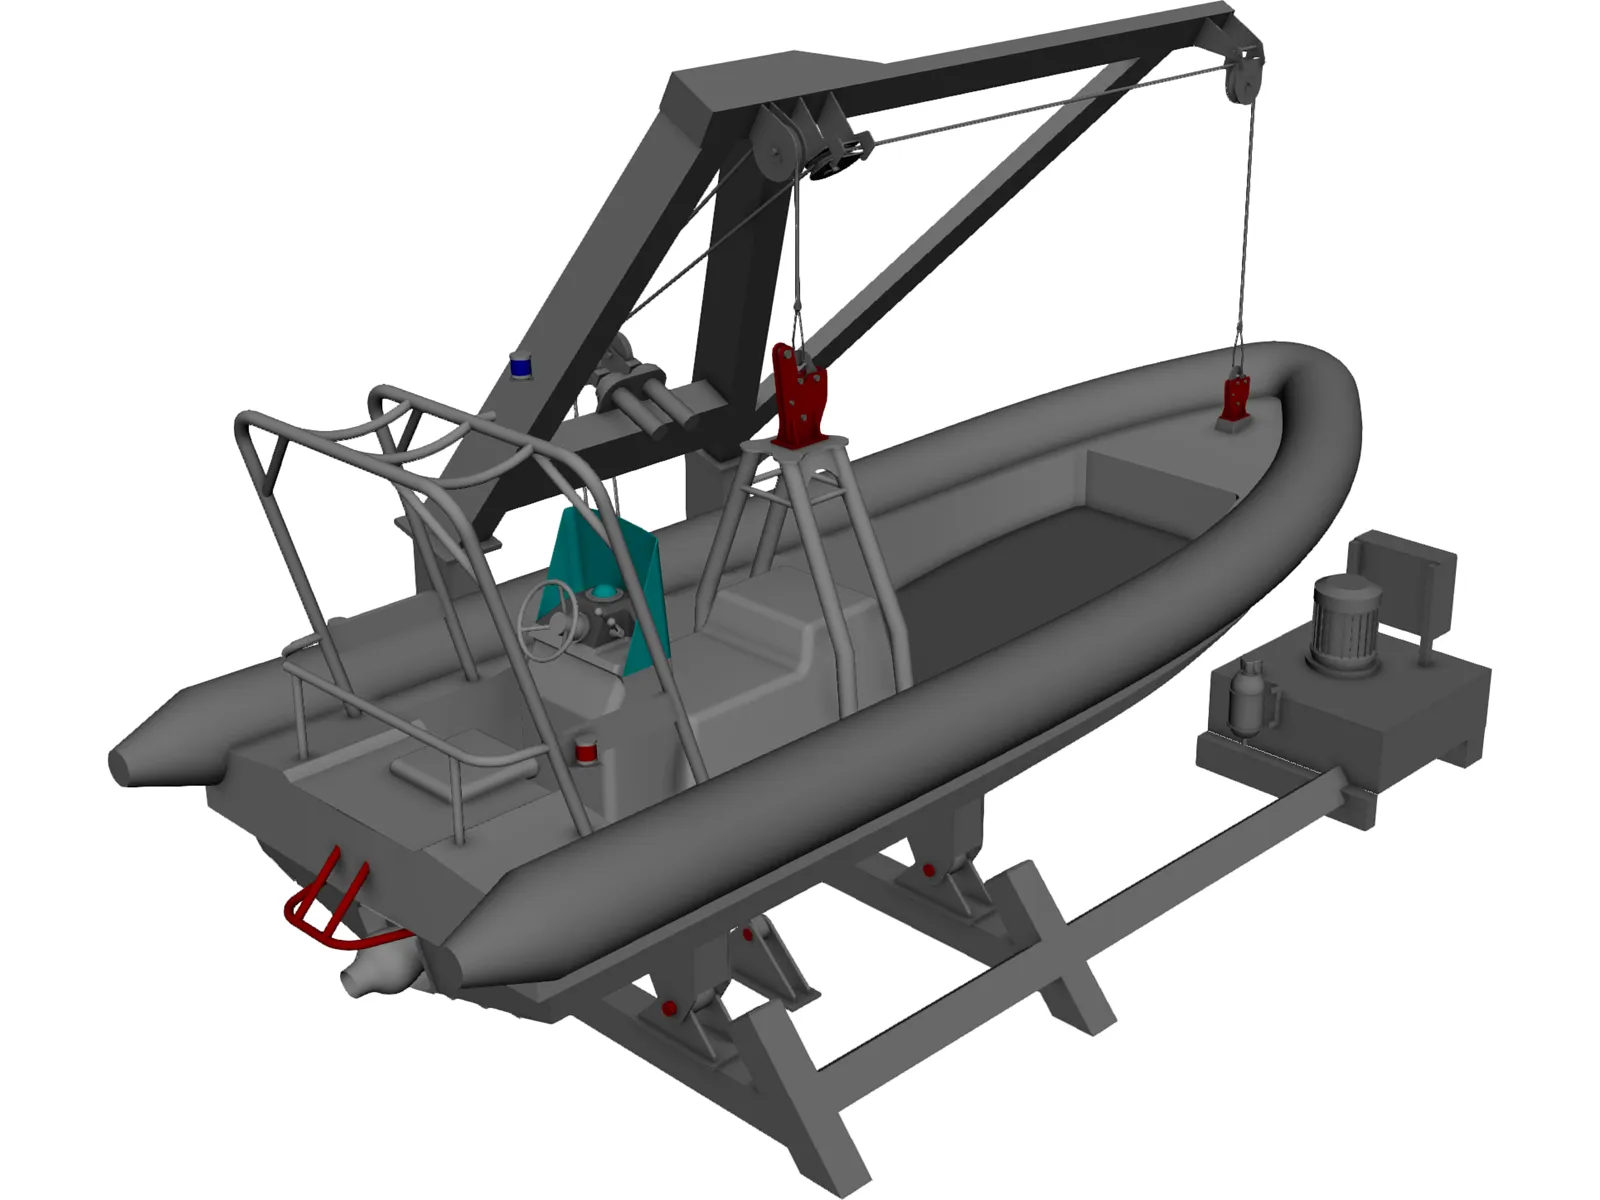 Davit and Inflatable Boat 3D Model